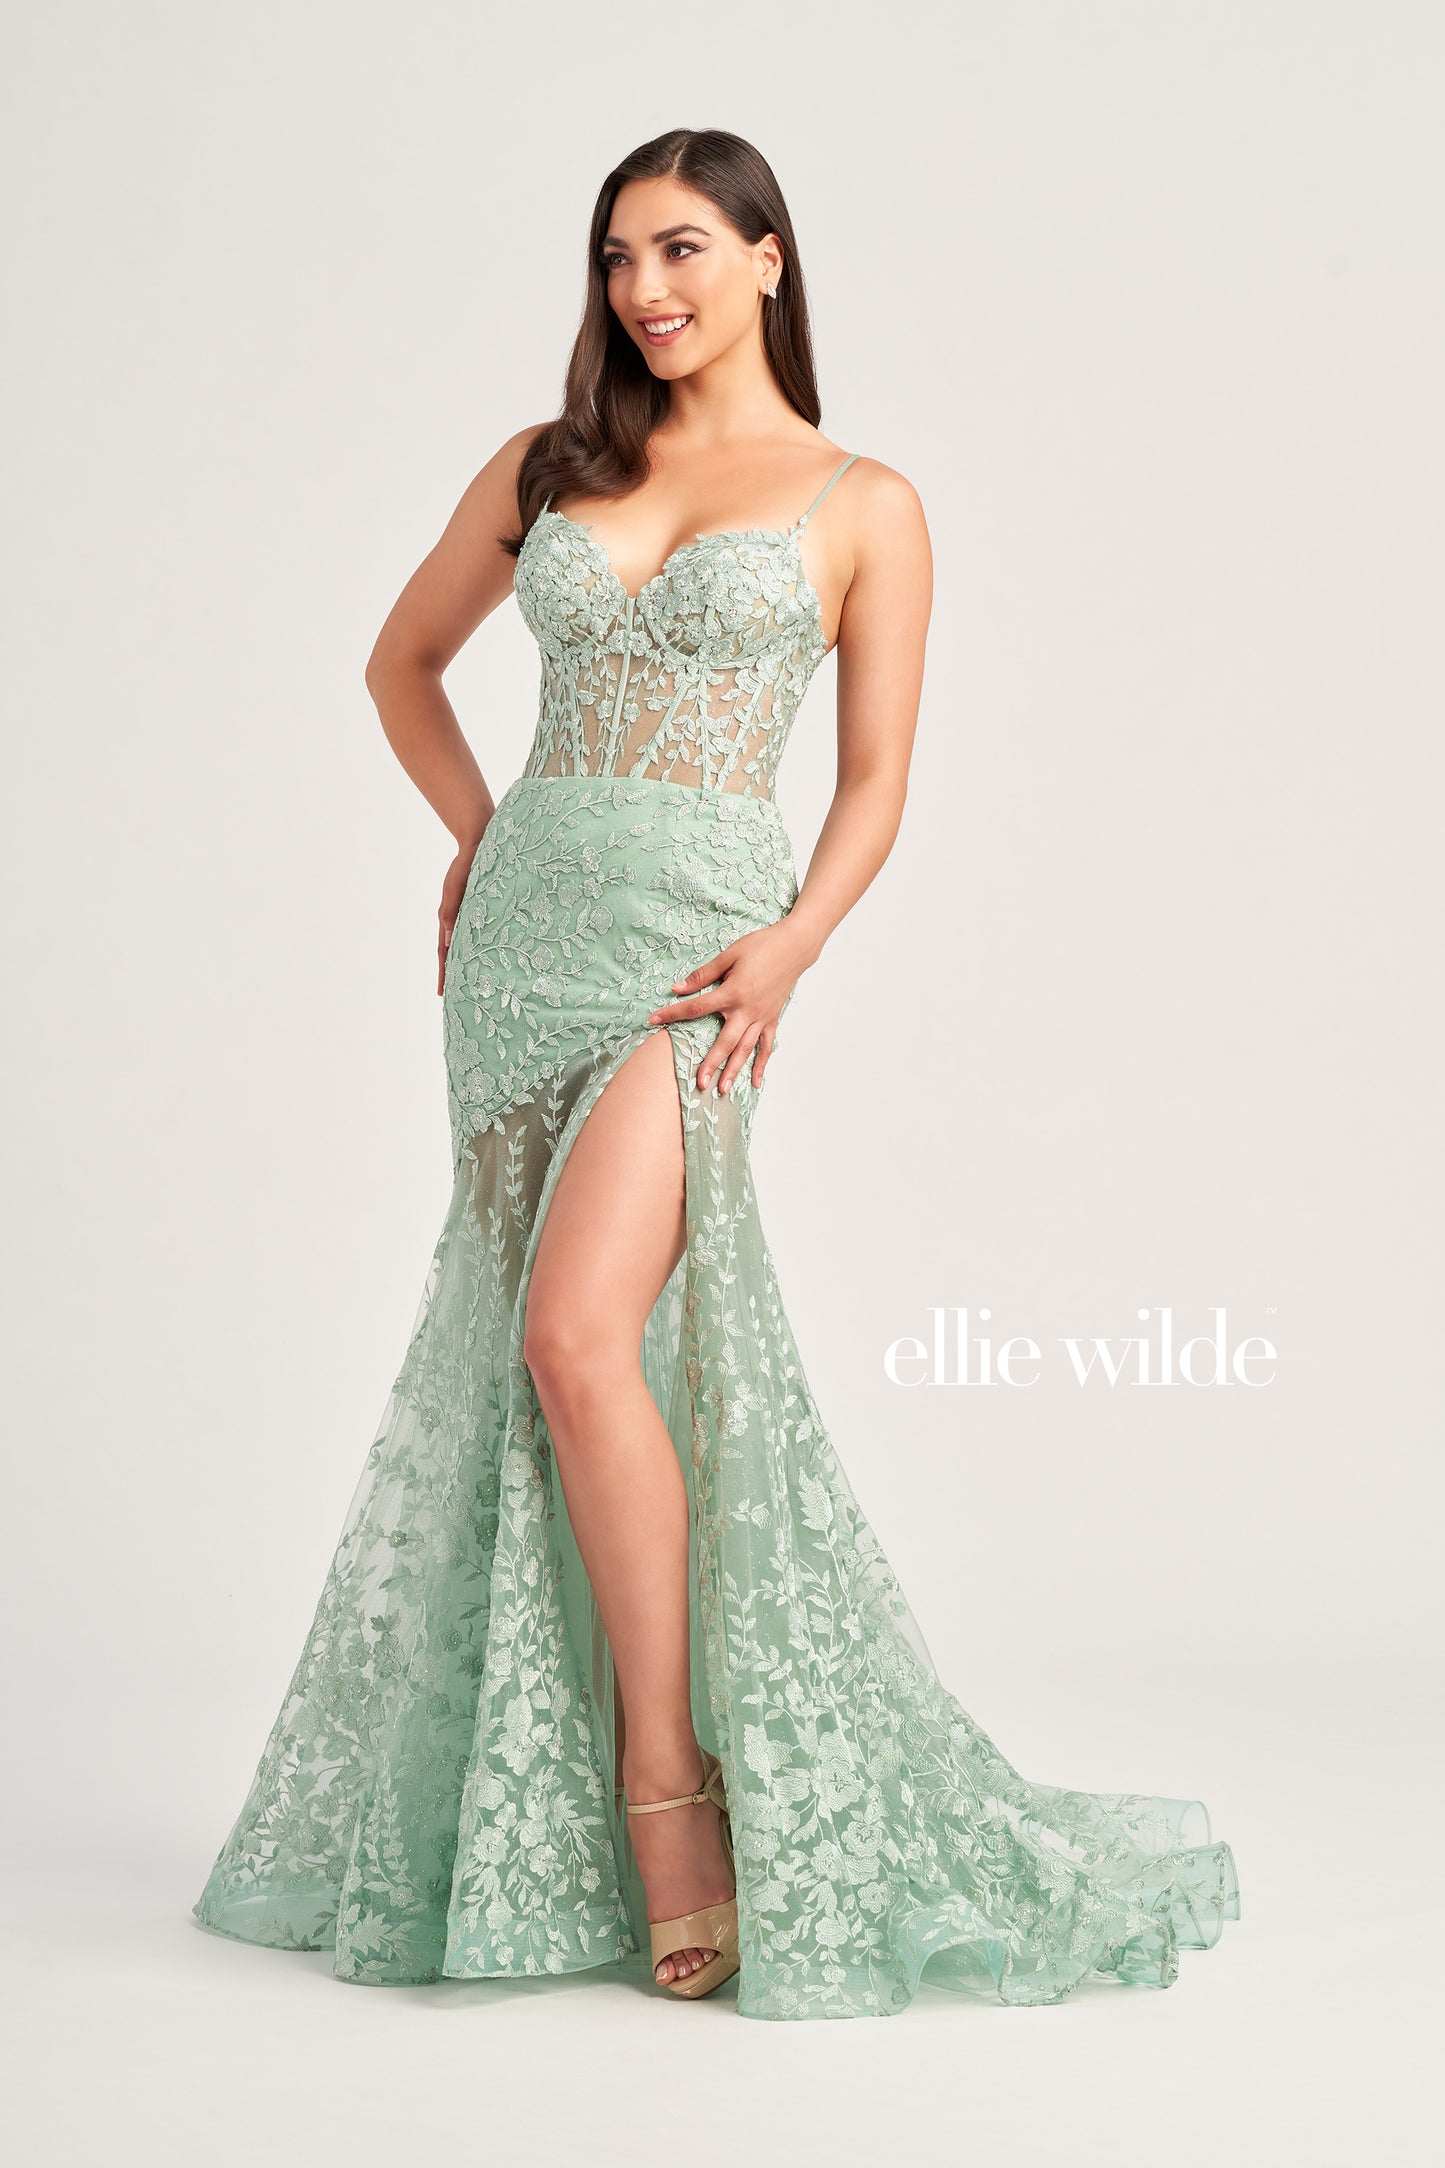 This Ellie Wilde EW35005 Sheer Corset Shimmer Lace Slit Prom Dress Formal Gown adds an elegant touch to formal events. Featuring a sheer corset with shimmer lace and an asymmetrical sheer skirt train, this gorgeous gown will make you stand out. Perfect for the special night.  COLOR: RED, LIGHT YELLOW, LIGHT BLUE, MAGENTA, ROYAL BLUE, EMERALD/NUDE, SAGE SIZE: 00 - 16